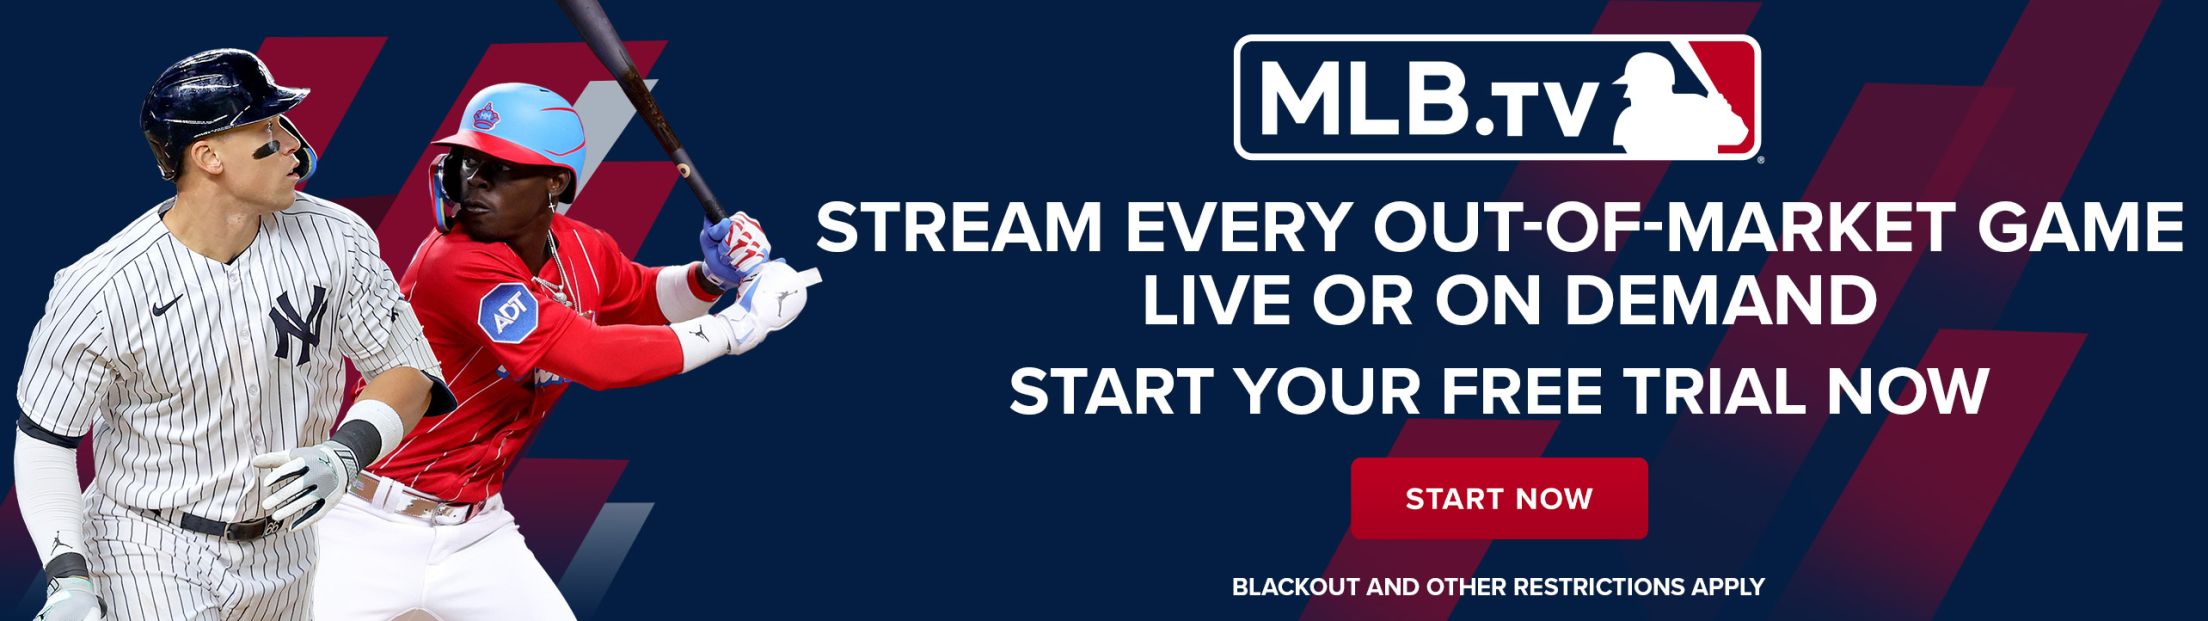 ESPN and MLB expand partnership with new rights agreement across Europe and  Africa  ESPN Press Room EMEA